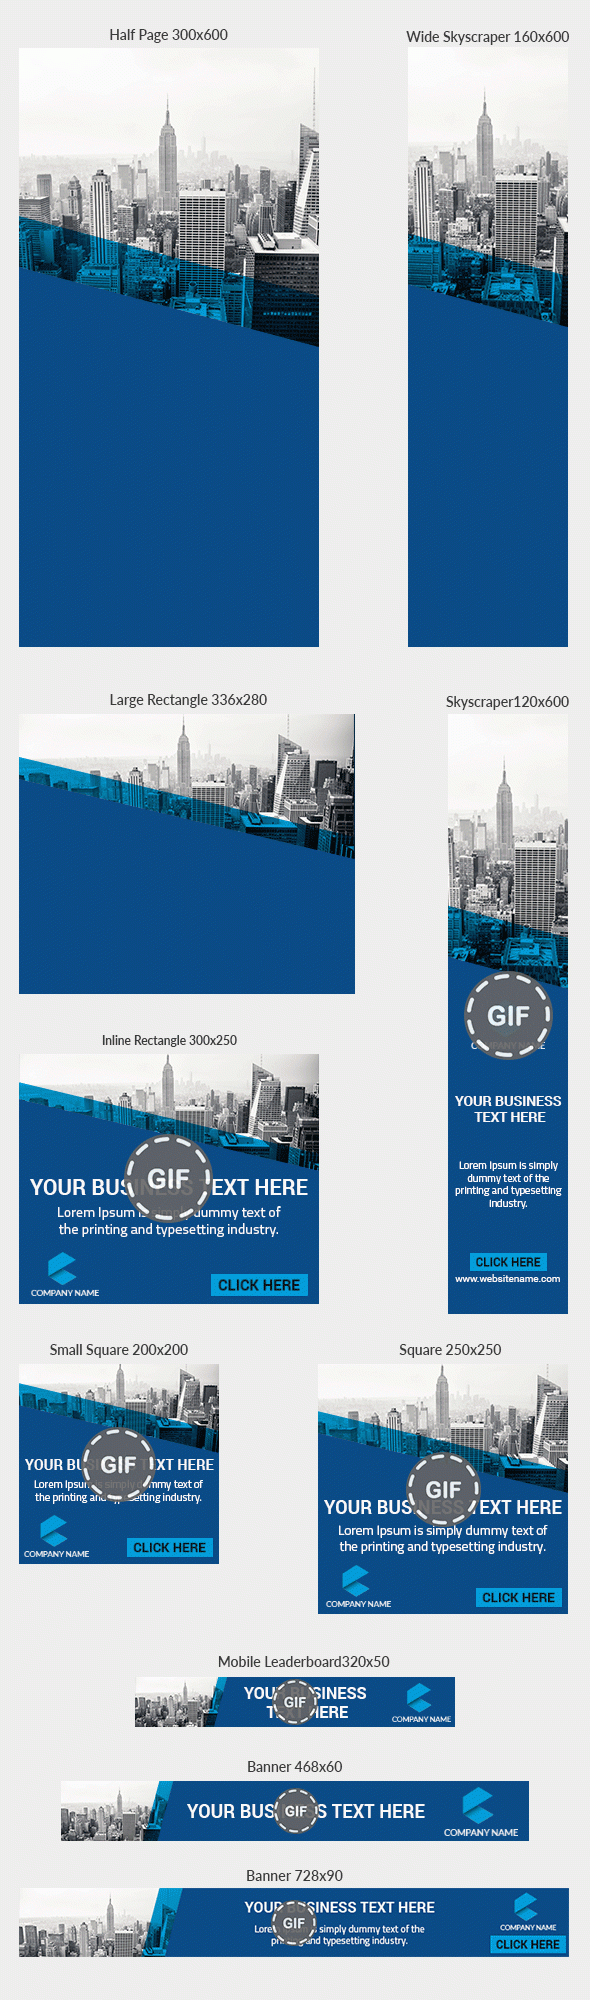 Corporate Animated Banner Template Psd Gif  Web Banners Template throughout Animated Banner Templates